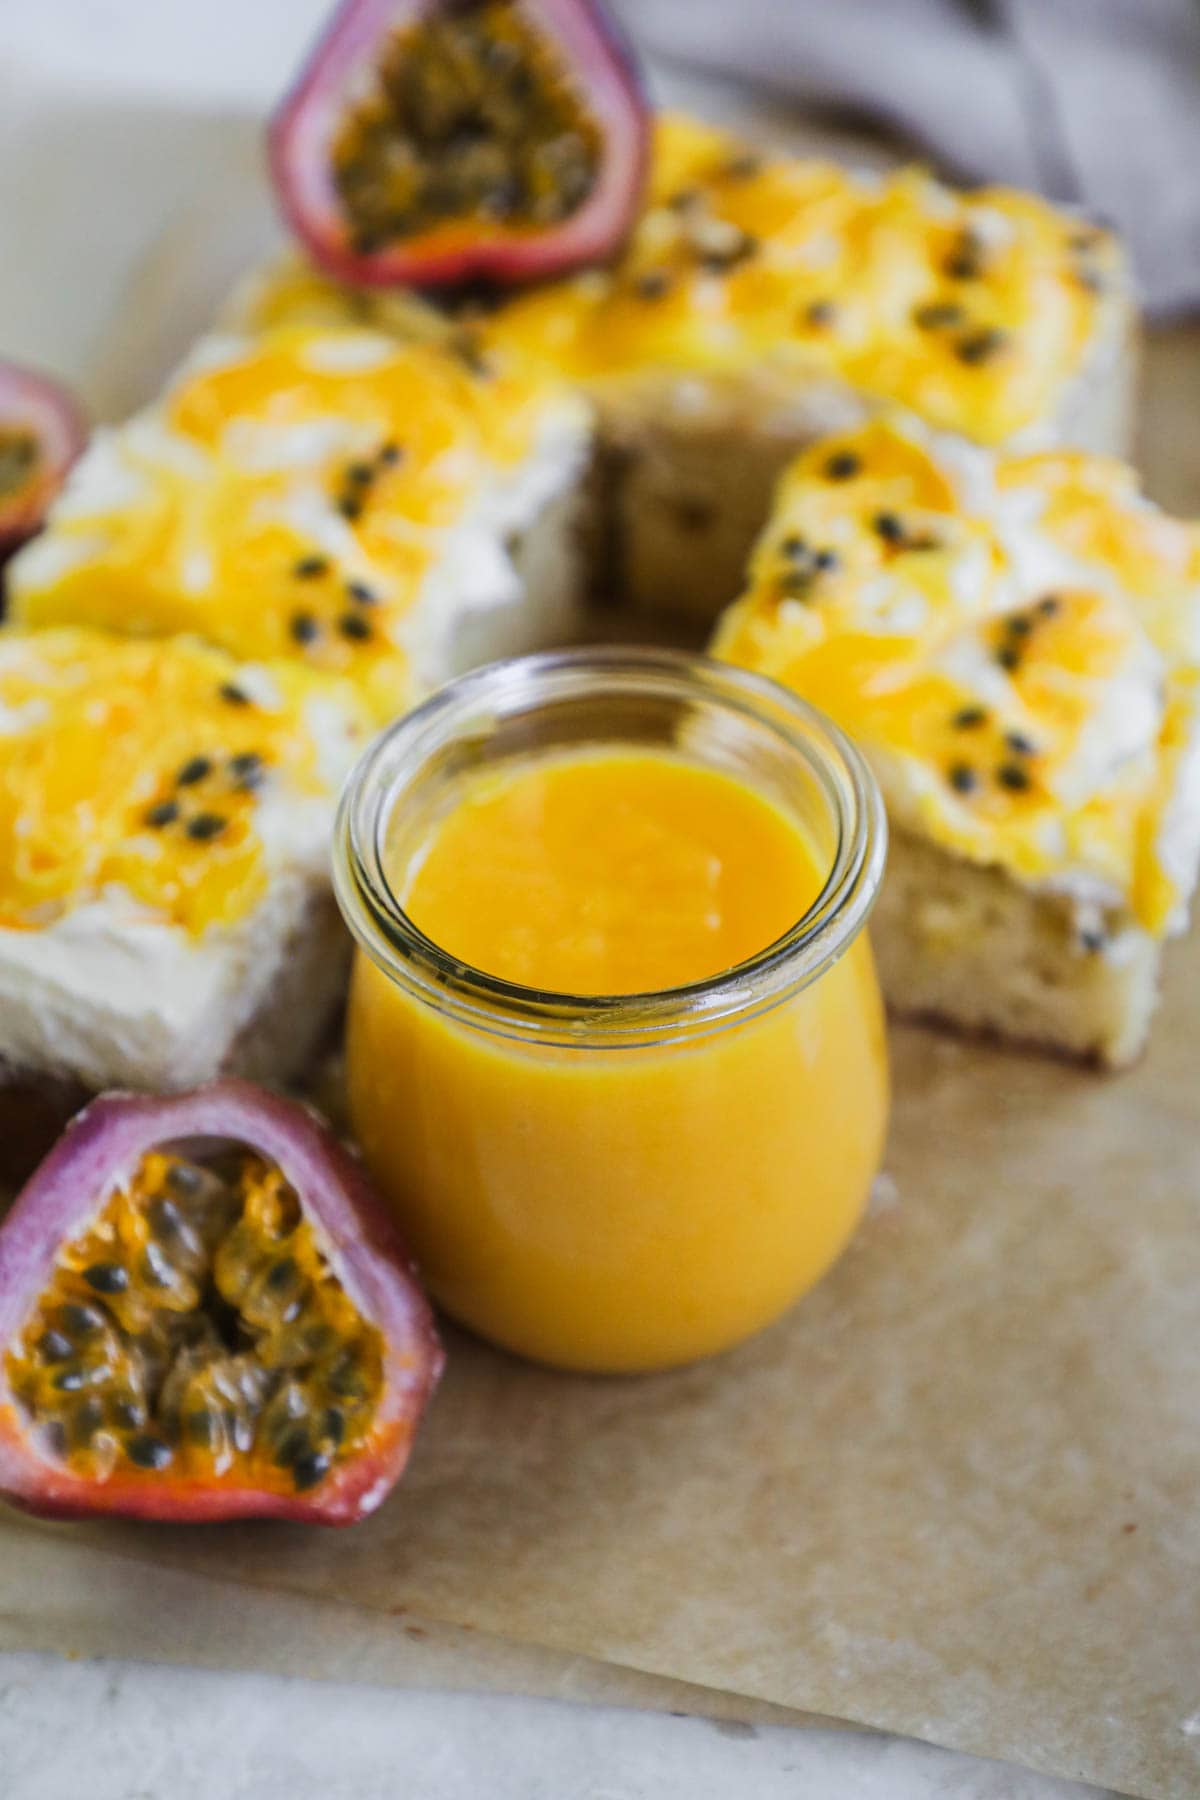 Passion fruit curd in a glass weck jar with slices of passion fruit cake topped with mascarpone whipped cream, lilikoi butter, and fresh passion fruit pulp.